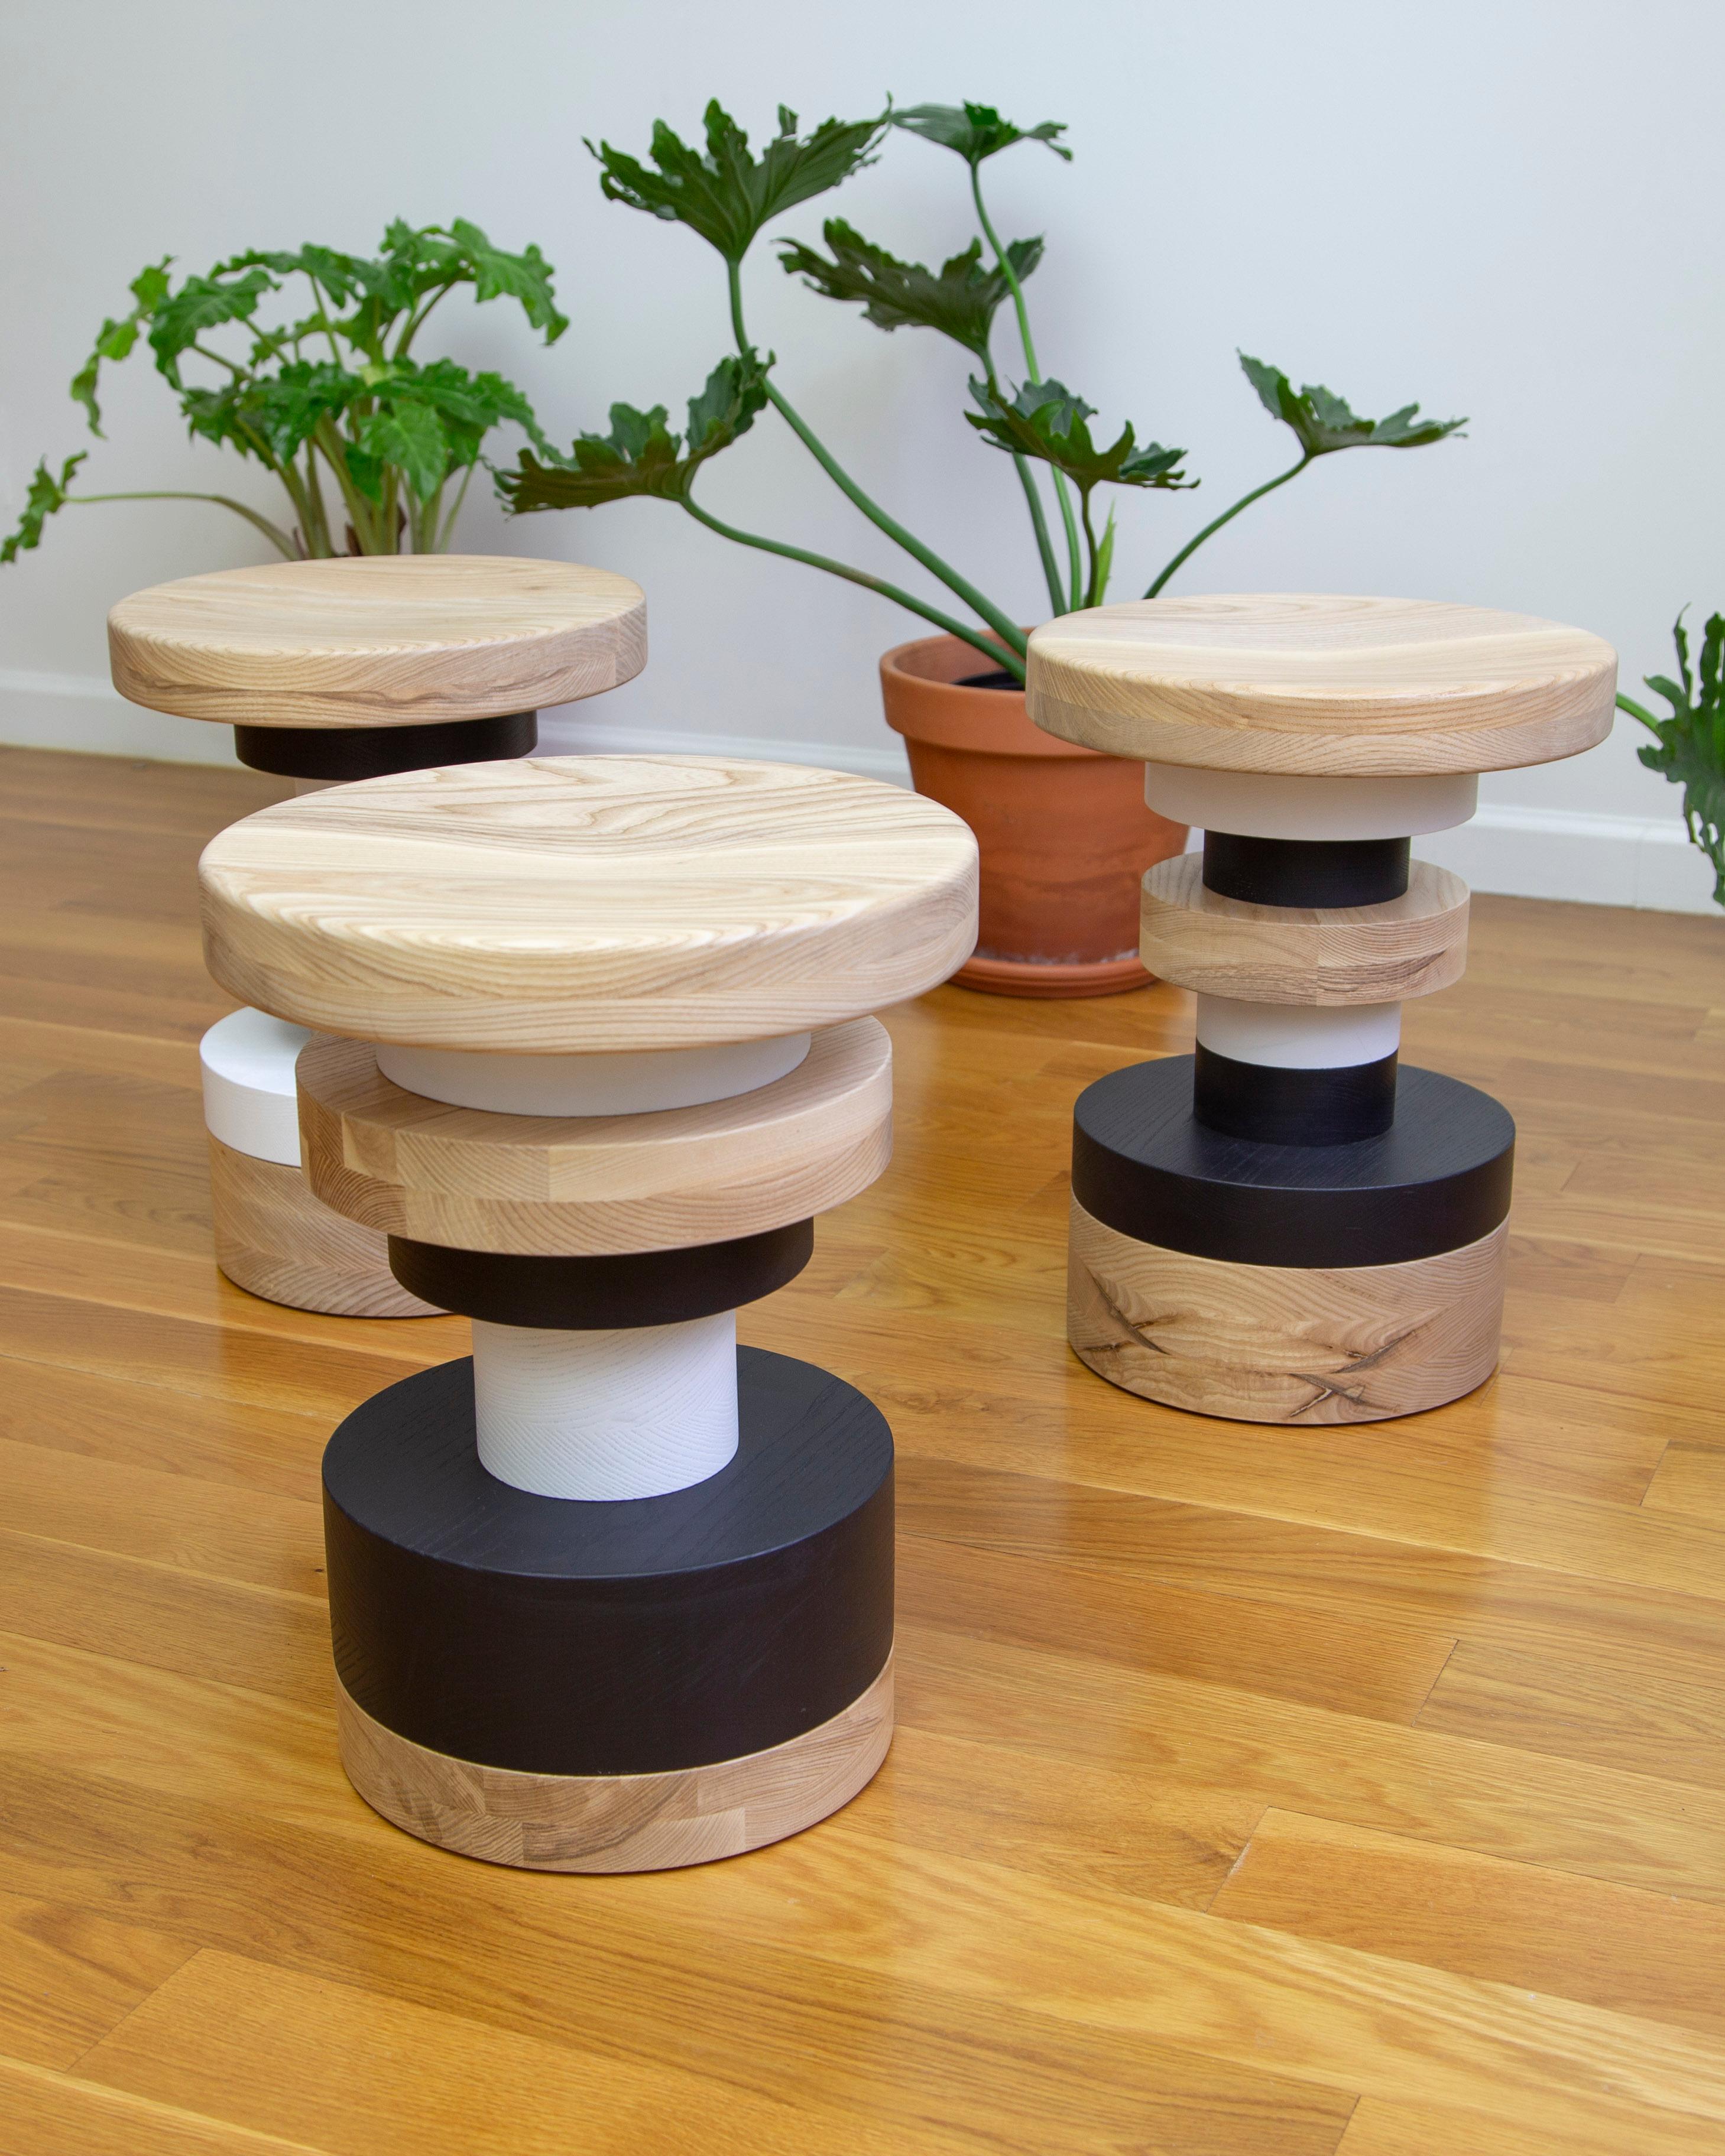 This listing is for a set of 3 Sass Stools as shown in the first image. Each stool has a different shape so they are great to mix and match. We also sell the stools individually in our other listings. 

The Sottsass inspired “Sass Stools” are